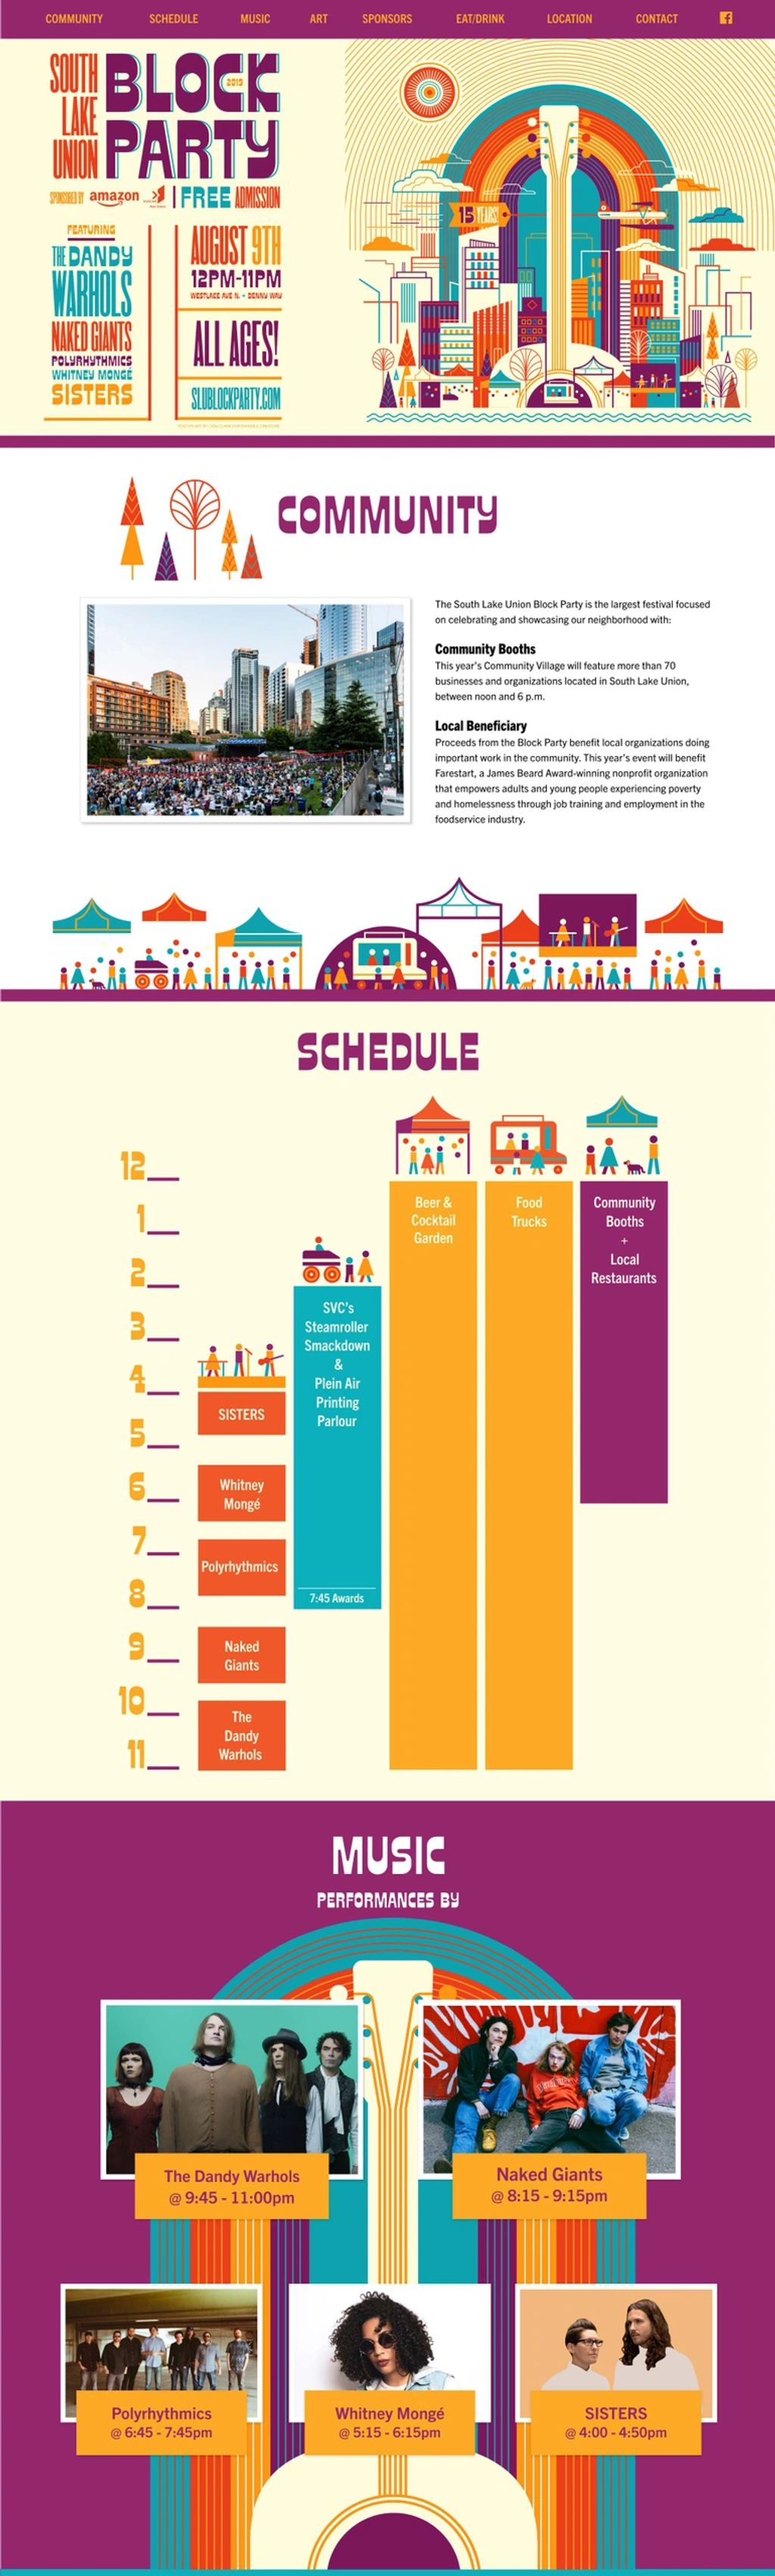 Fun illustration showing SLU Block Party, schedule, musical guests, food, drinks, art, and location.